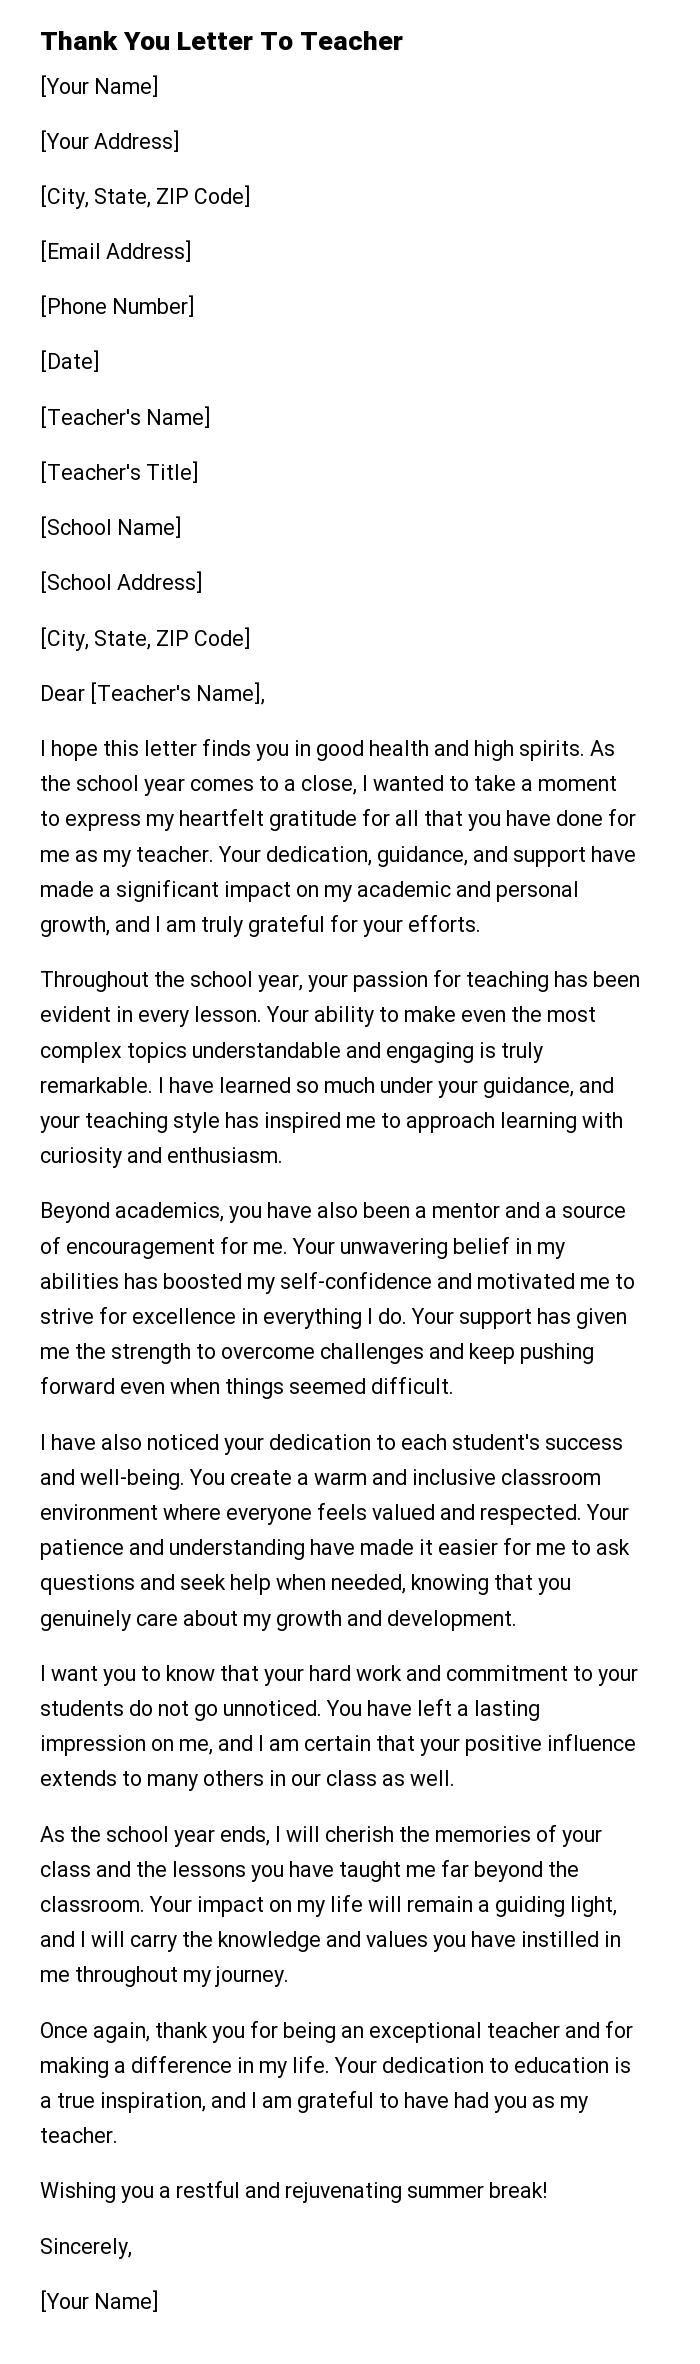 Thank You Letter To Teacher